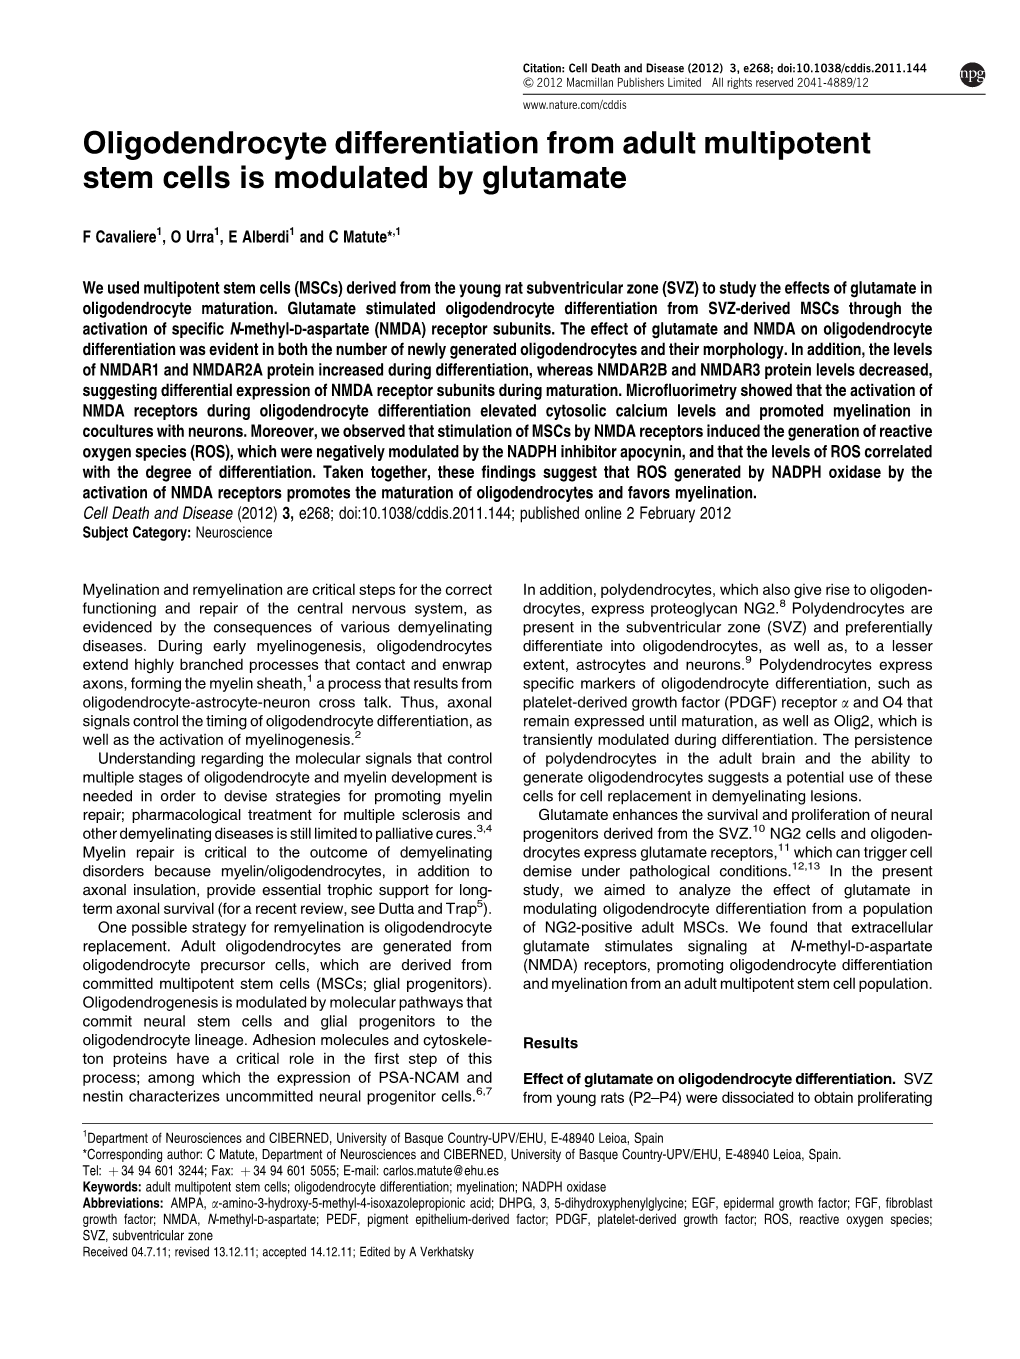 Oligodendrocyte Differentiation from Adult Multipotent Stem Cells Is Modulated by Glutamate